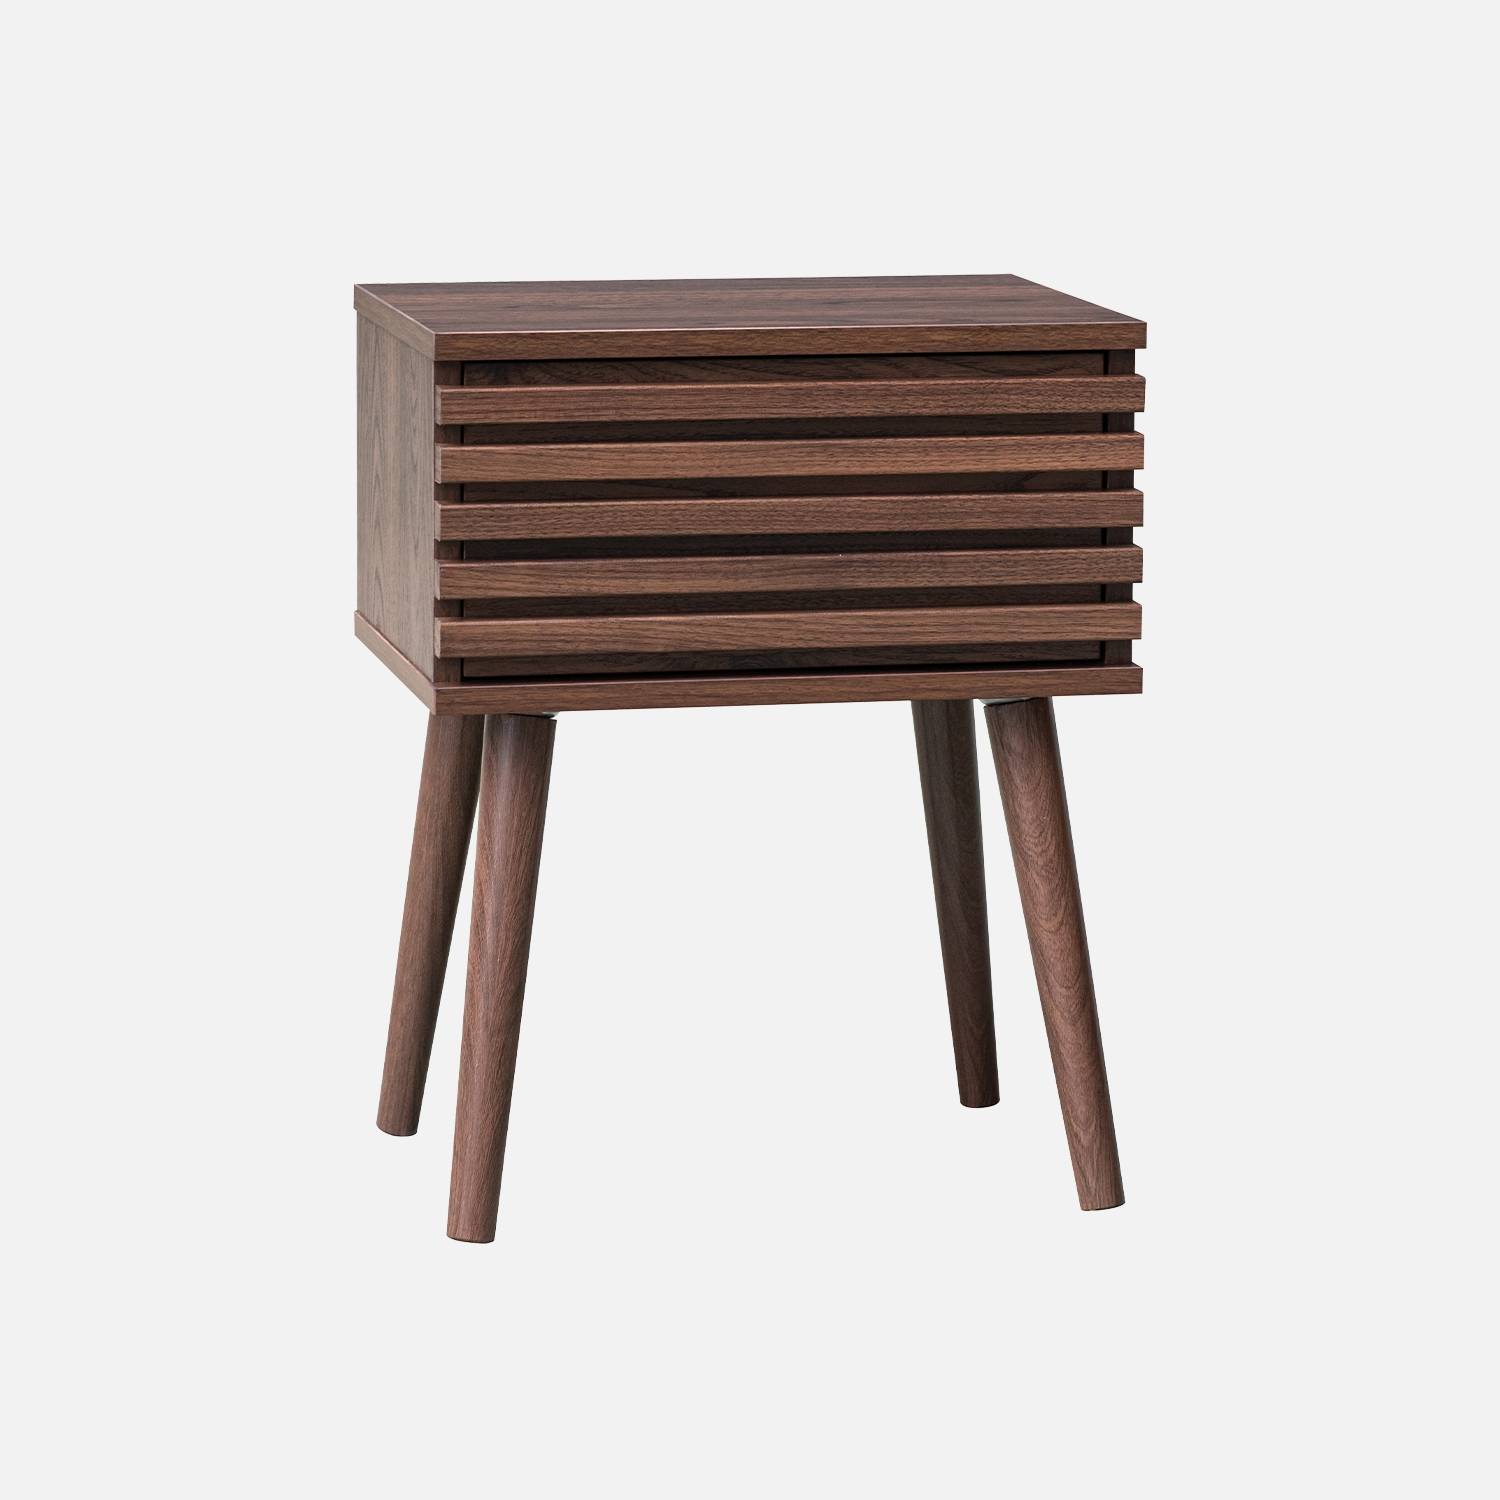 Scandi-style bedside table with grooved wooden effect, Walnut